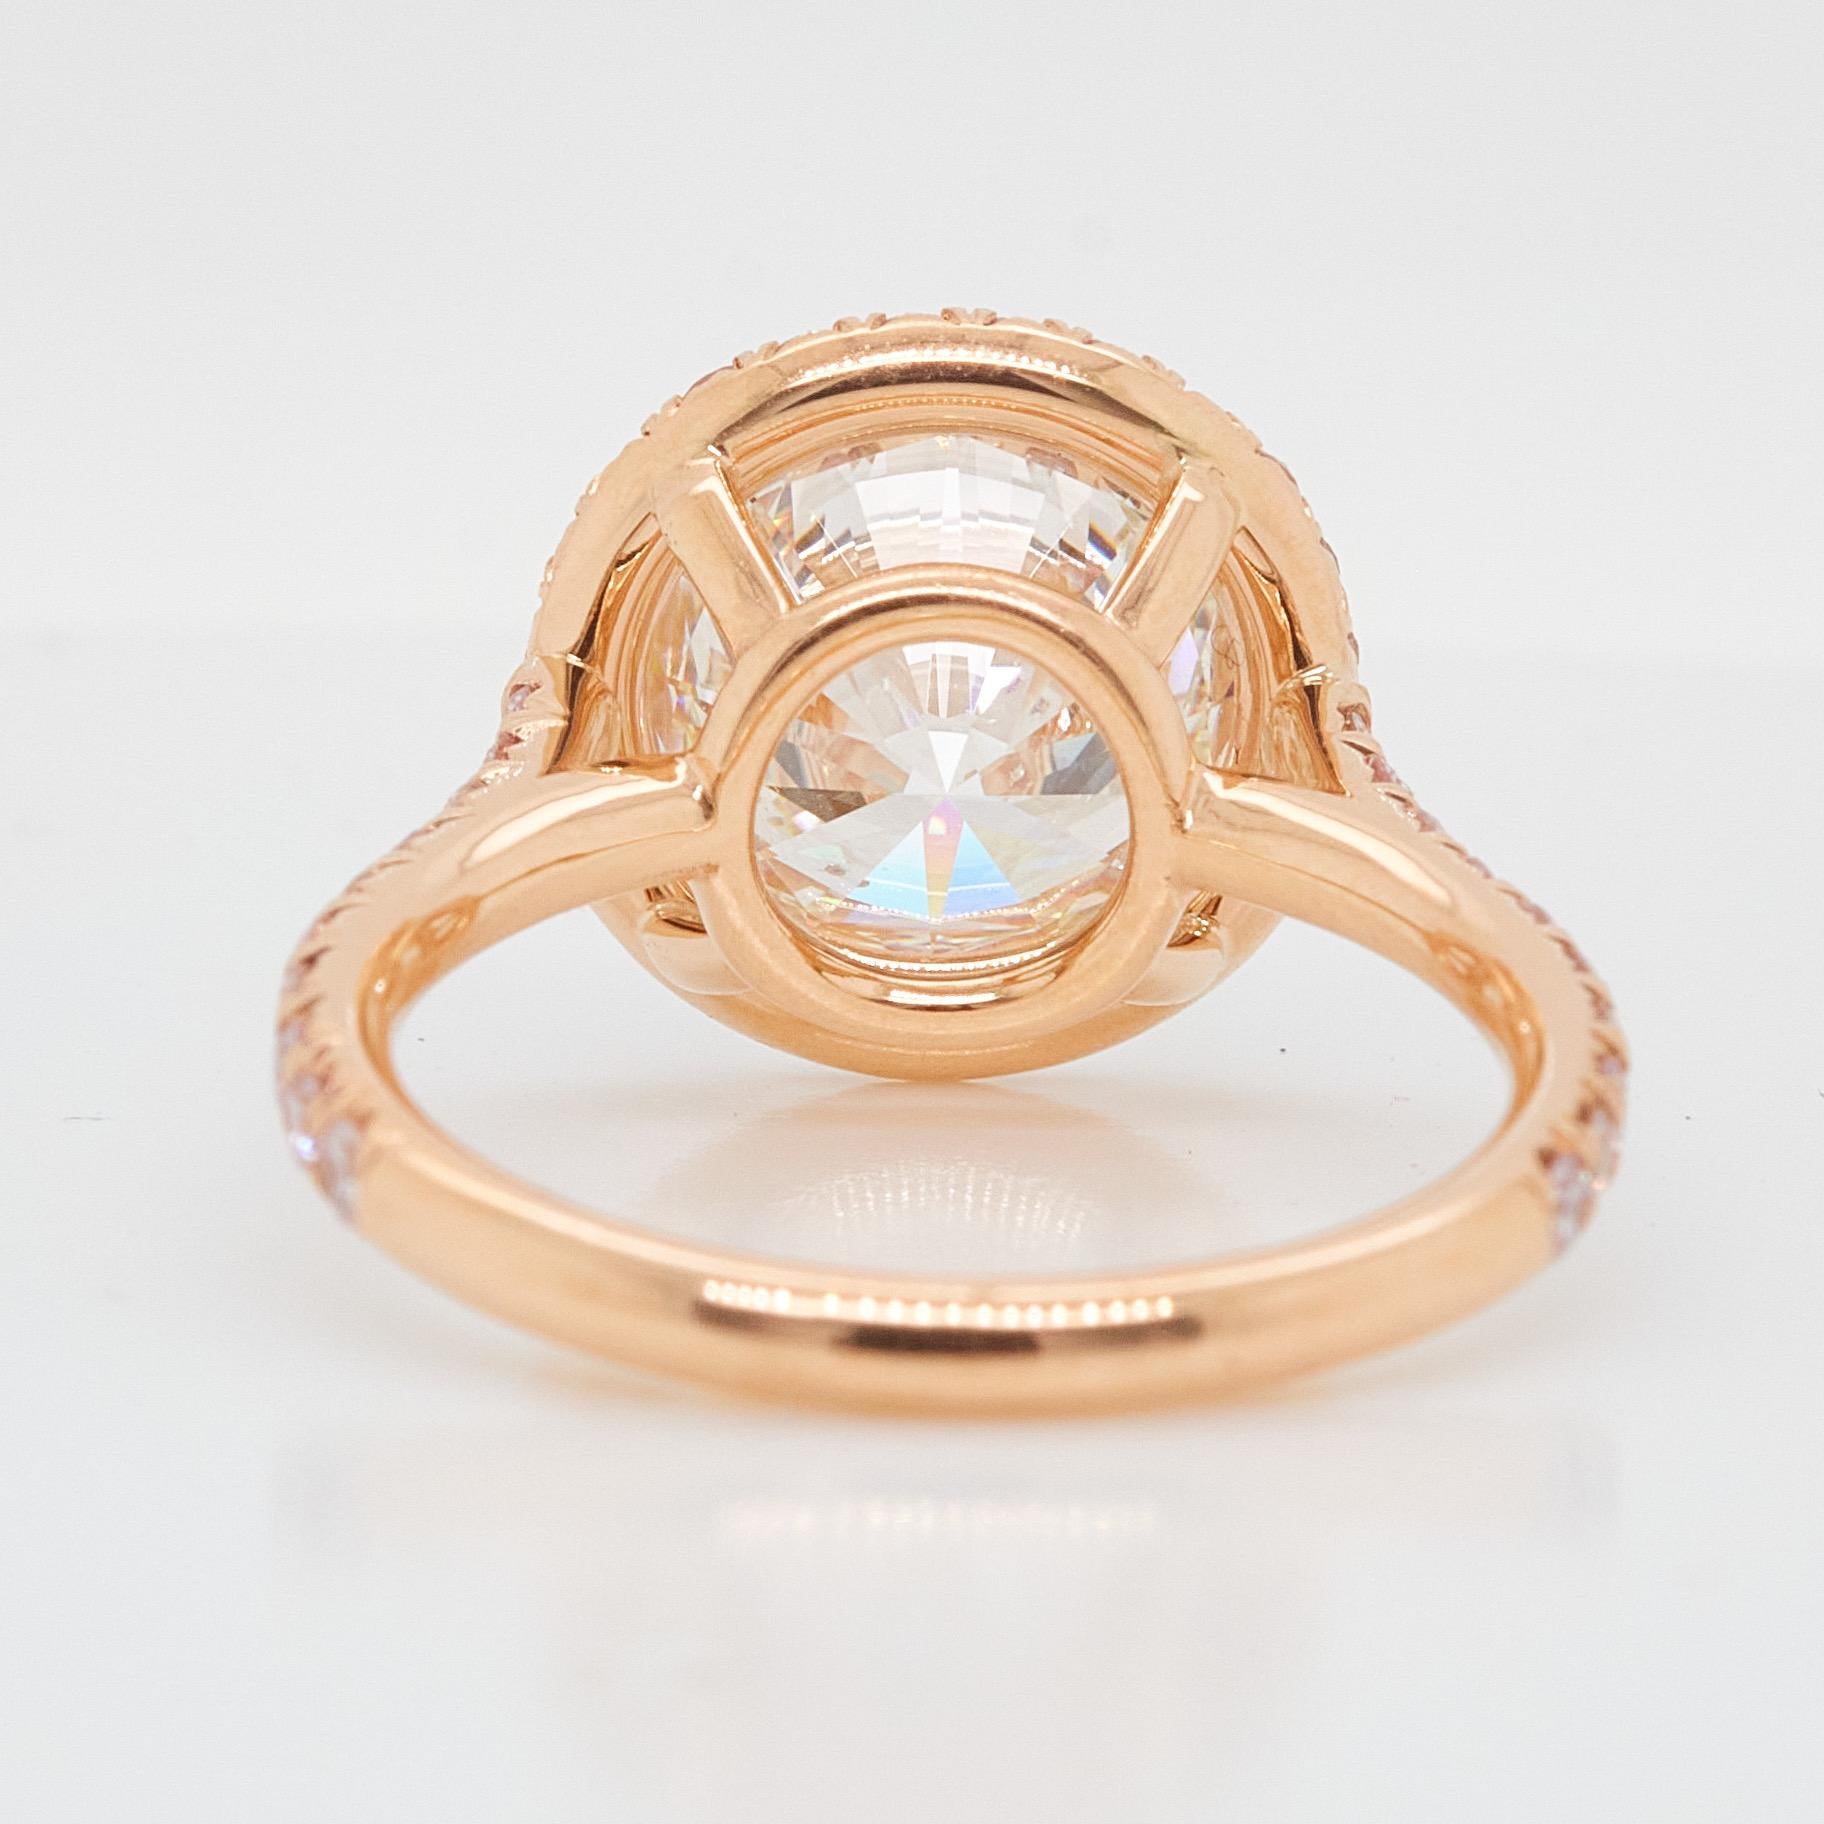 Contemporary 3.5 Carat Round Cut Diamond, Engagement Ring 18k Rose Gold, GIA Certified For Sale